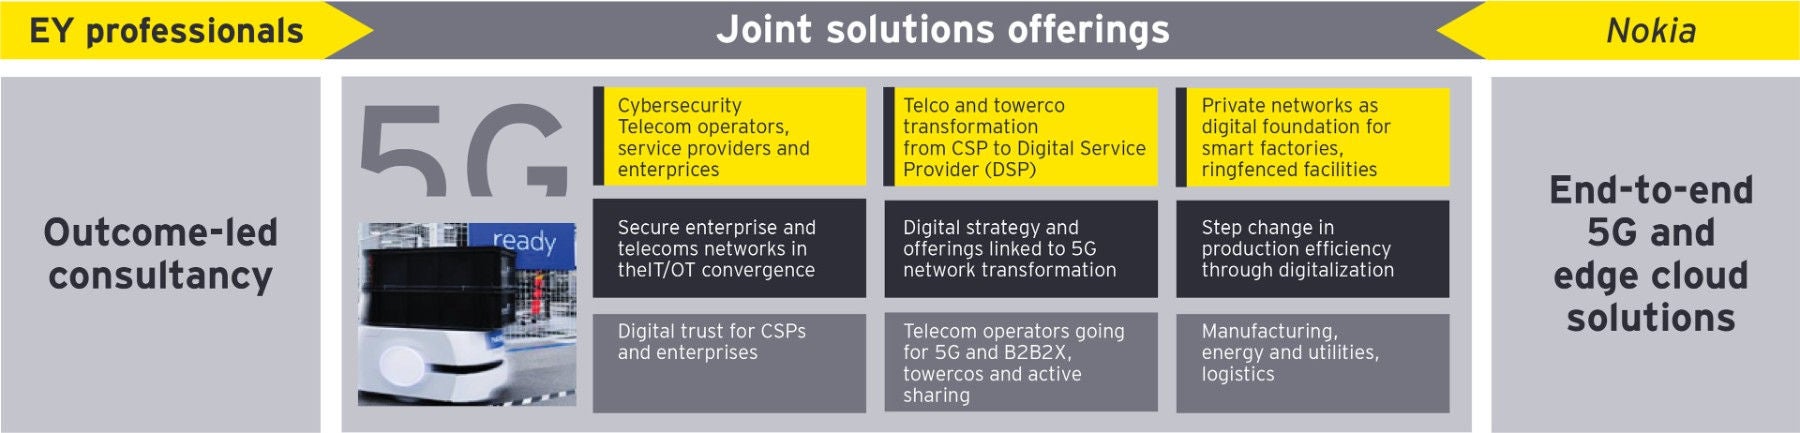 ey nokia alliance joint solutions